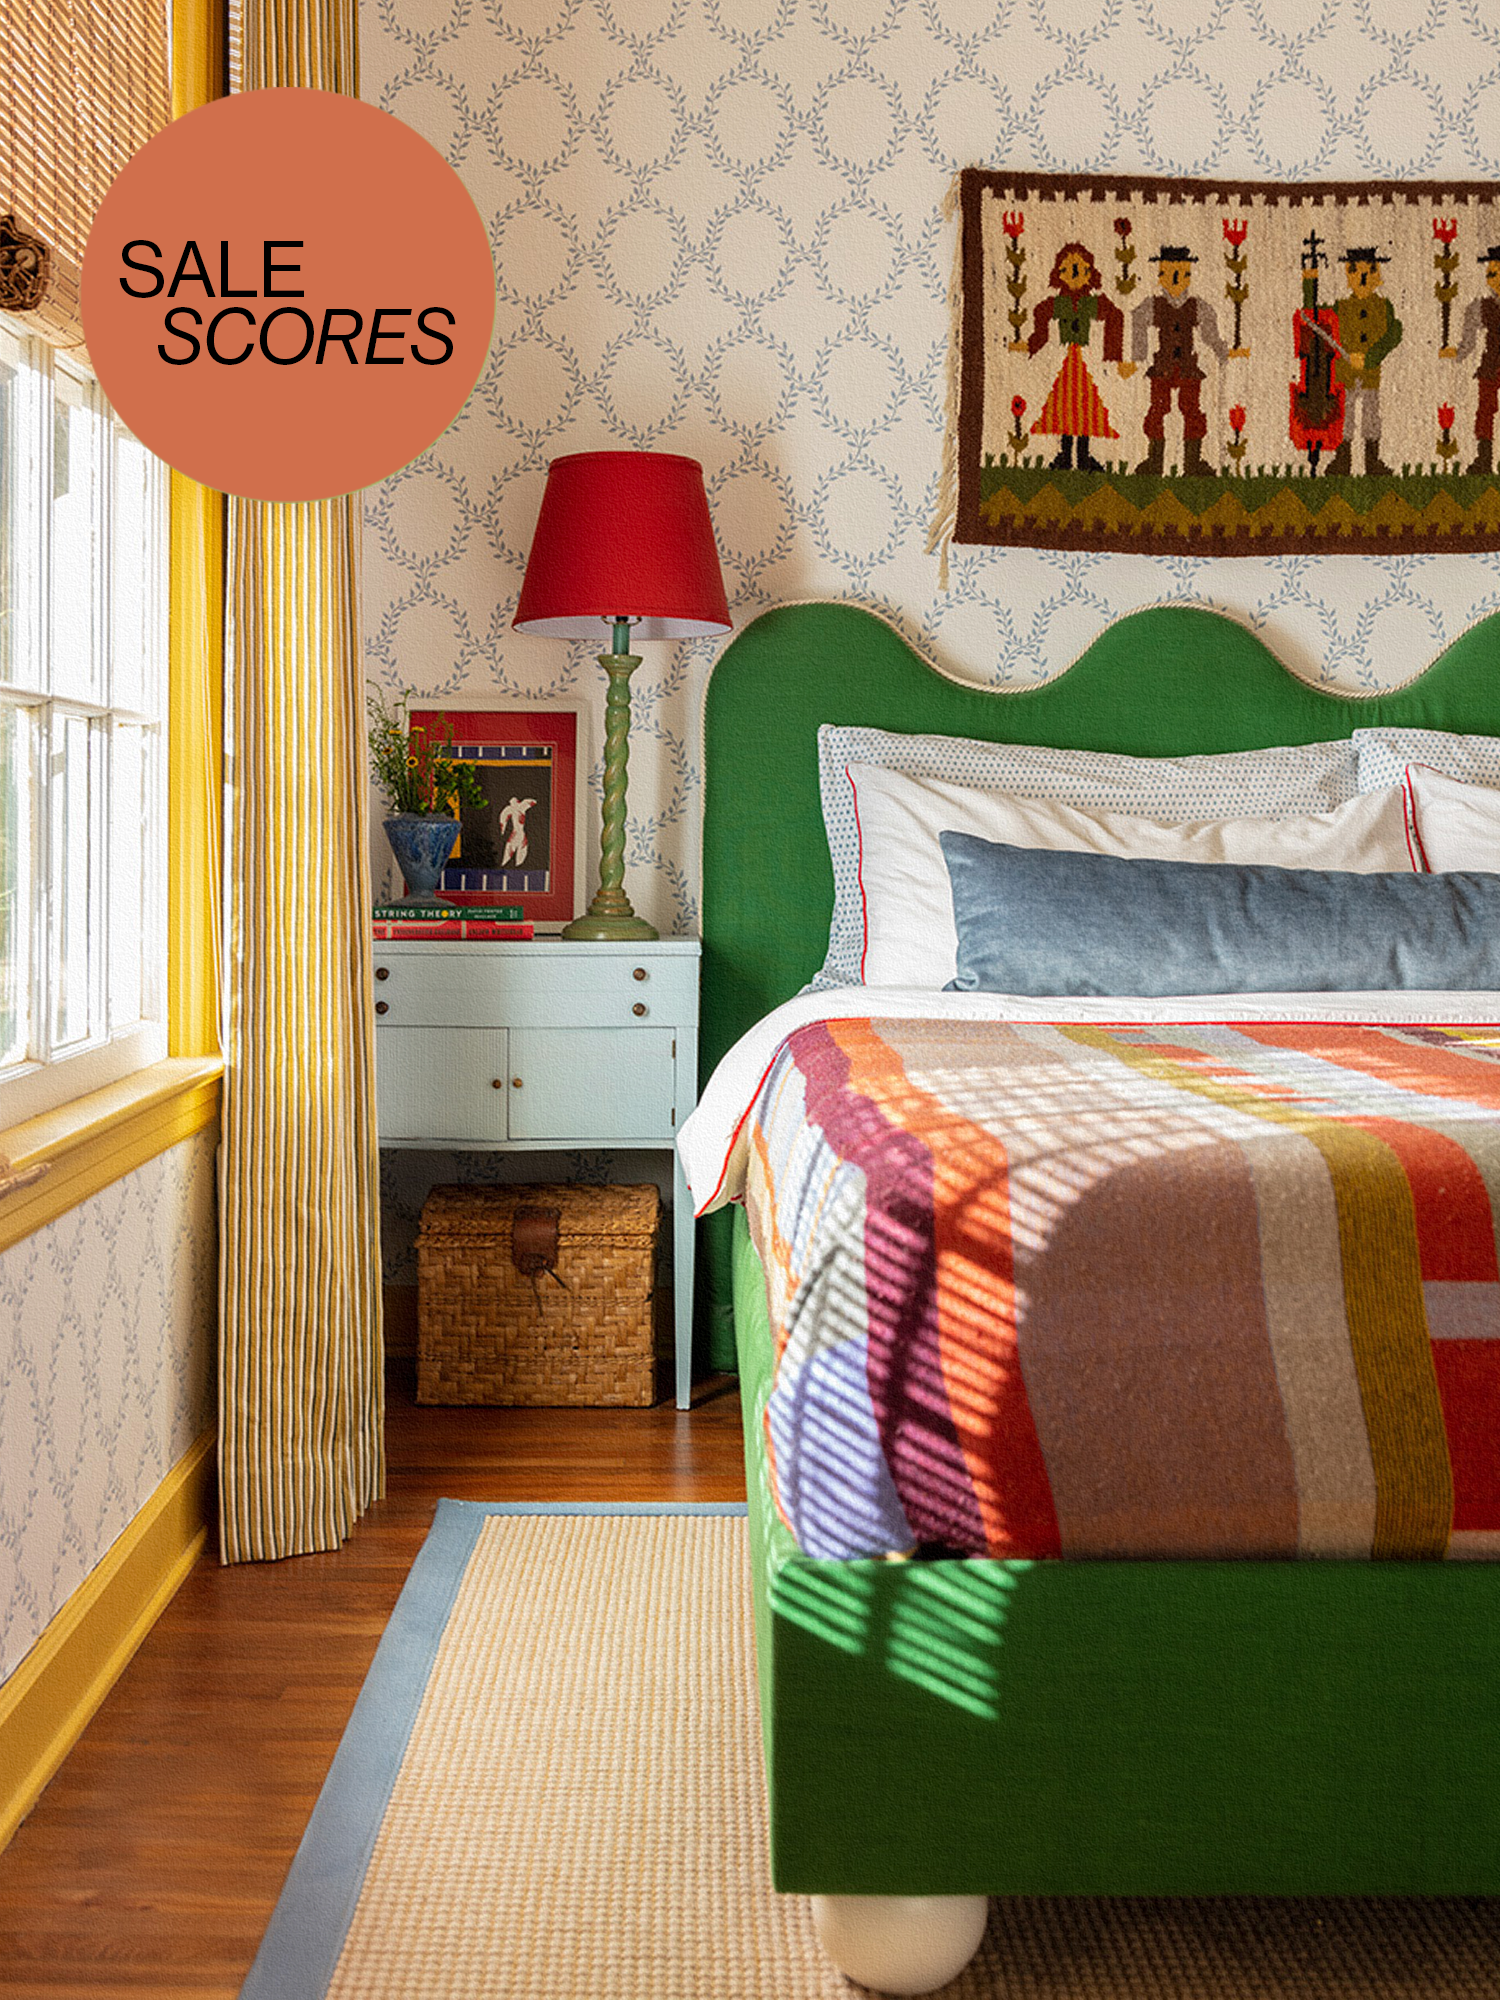 Colorful bedroom with green scalloped headboard and patterned quilt.